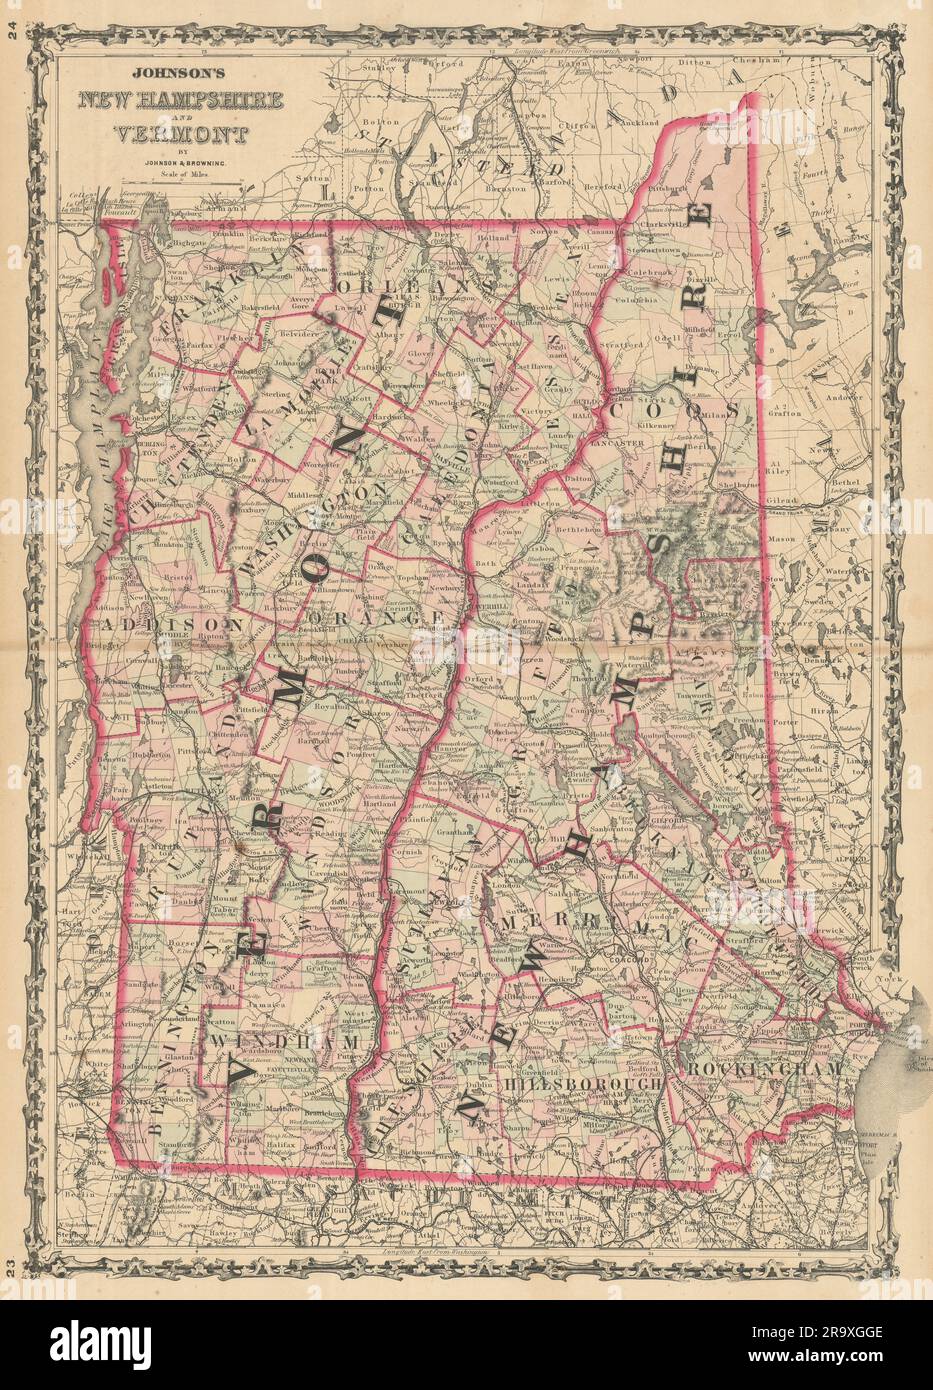 Johnson's New Hampshire & Vermont. US State map showing counties 1861 old Stock Photo